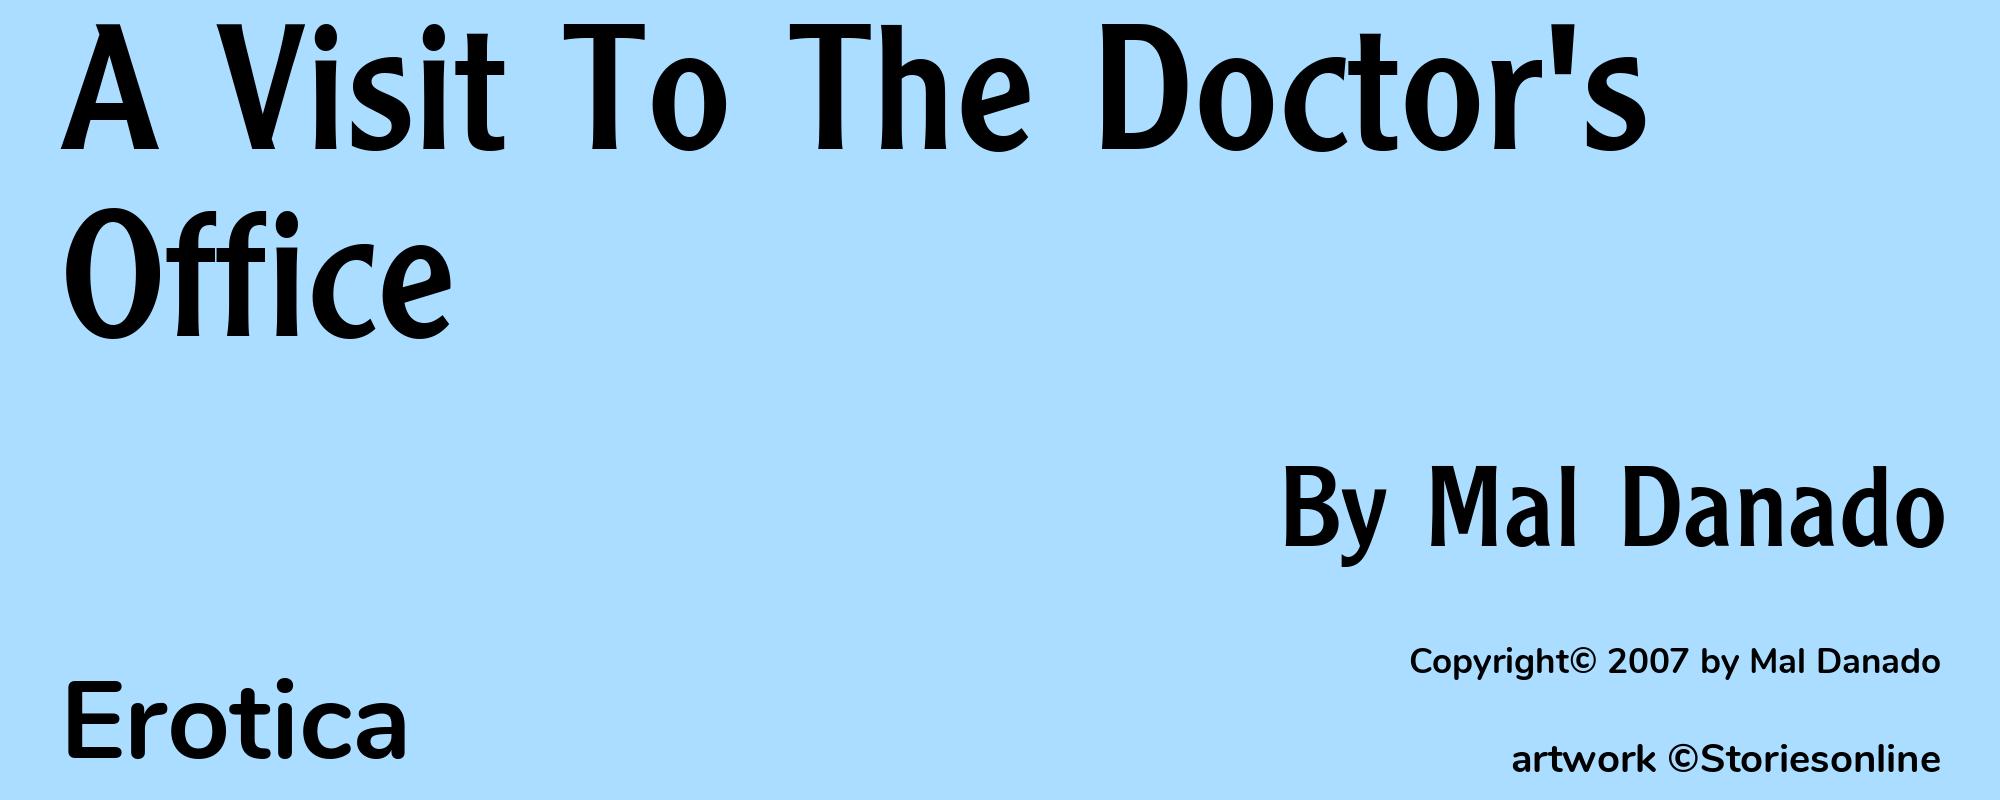 A Visit To The Doctor's Office - Cover